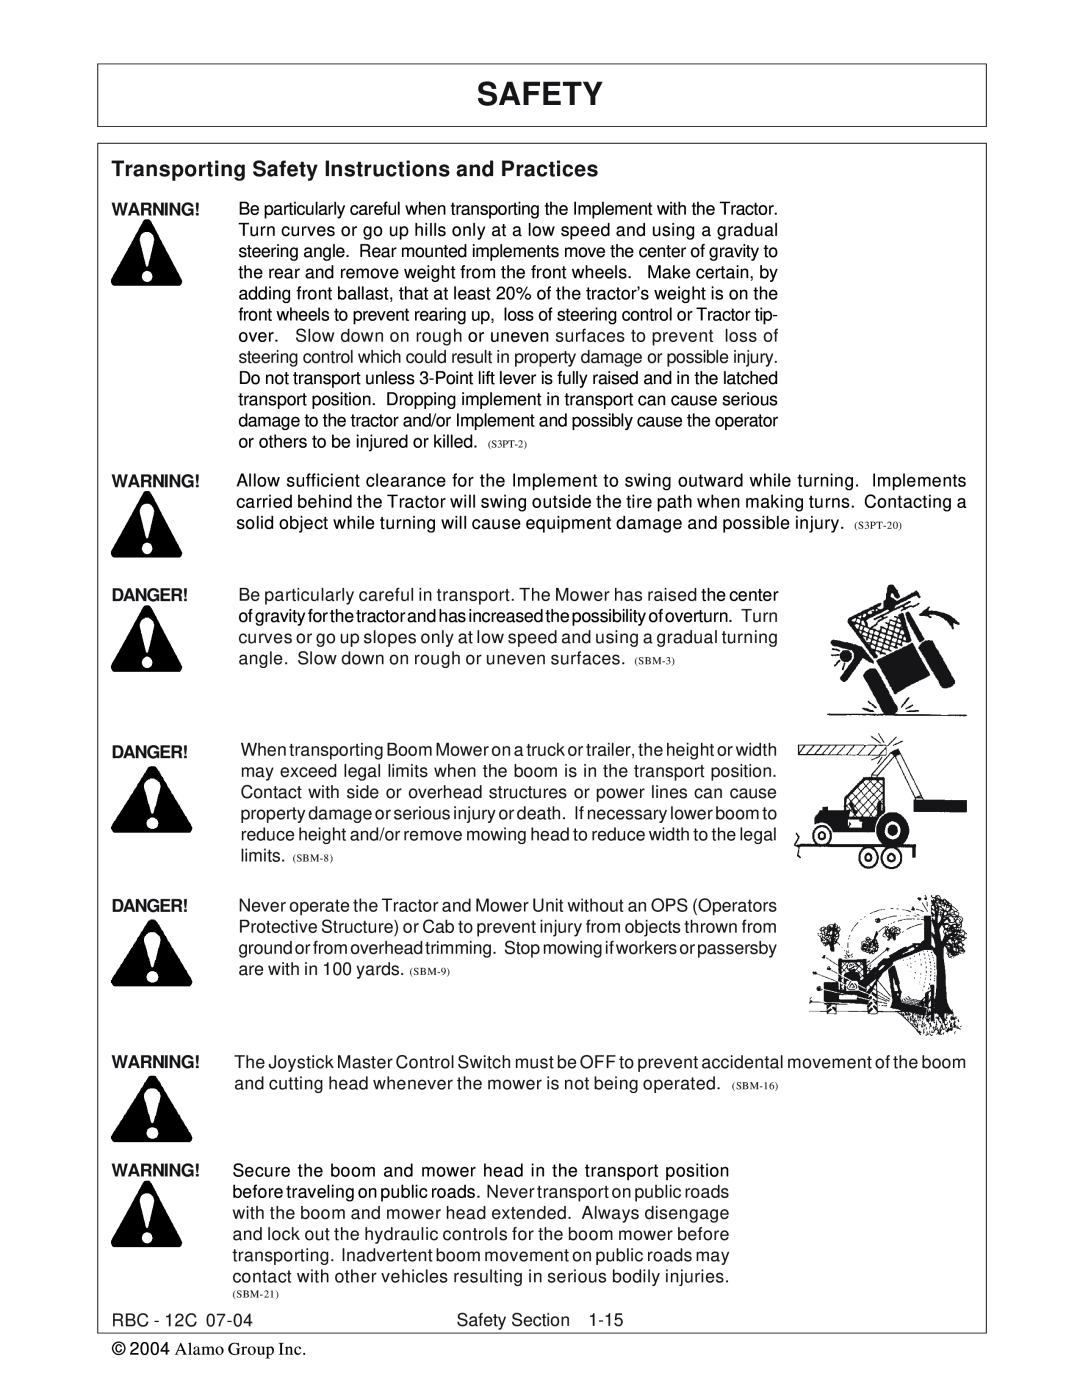 Tiger Products Co., Ltd RBF-12C manual Transporting Safety Instructions and Practices, Danger 